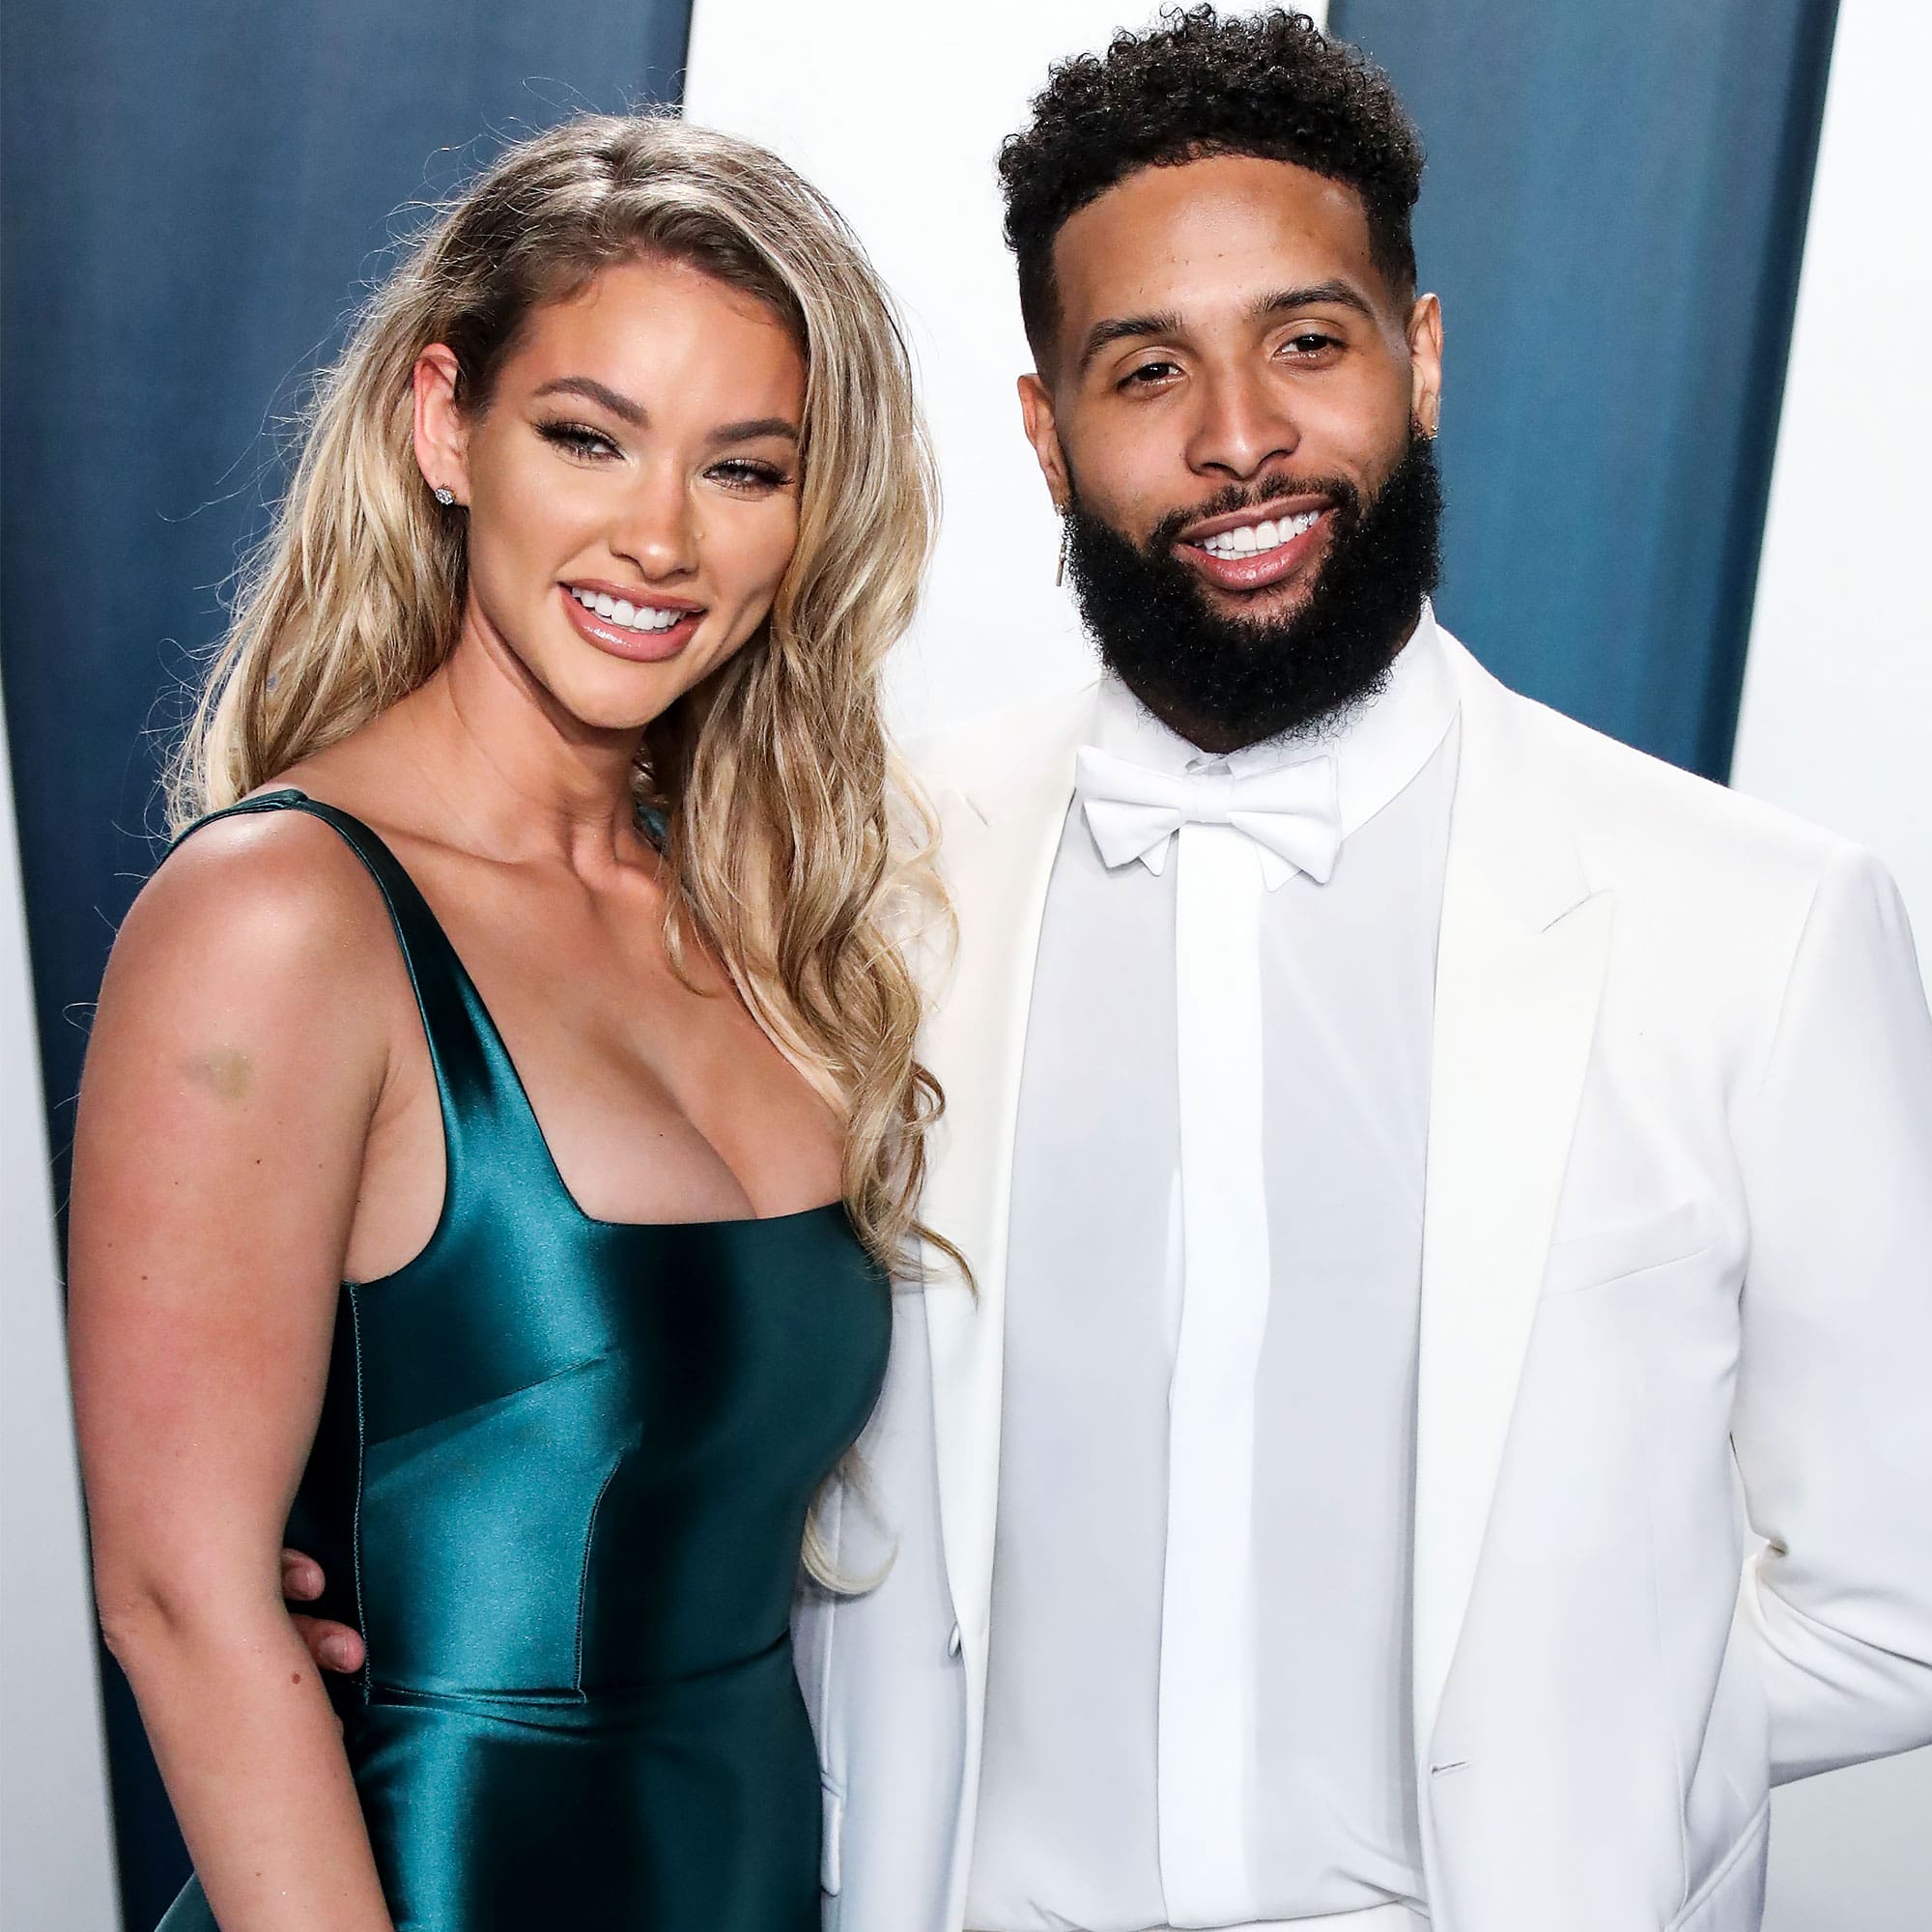 ”odell-beckham-jr-and-lauren-wood-celebrate-the-birth-of-their-child”